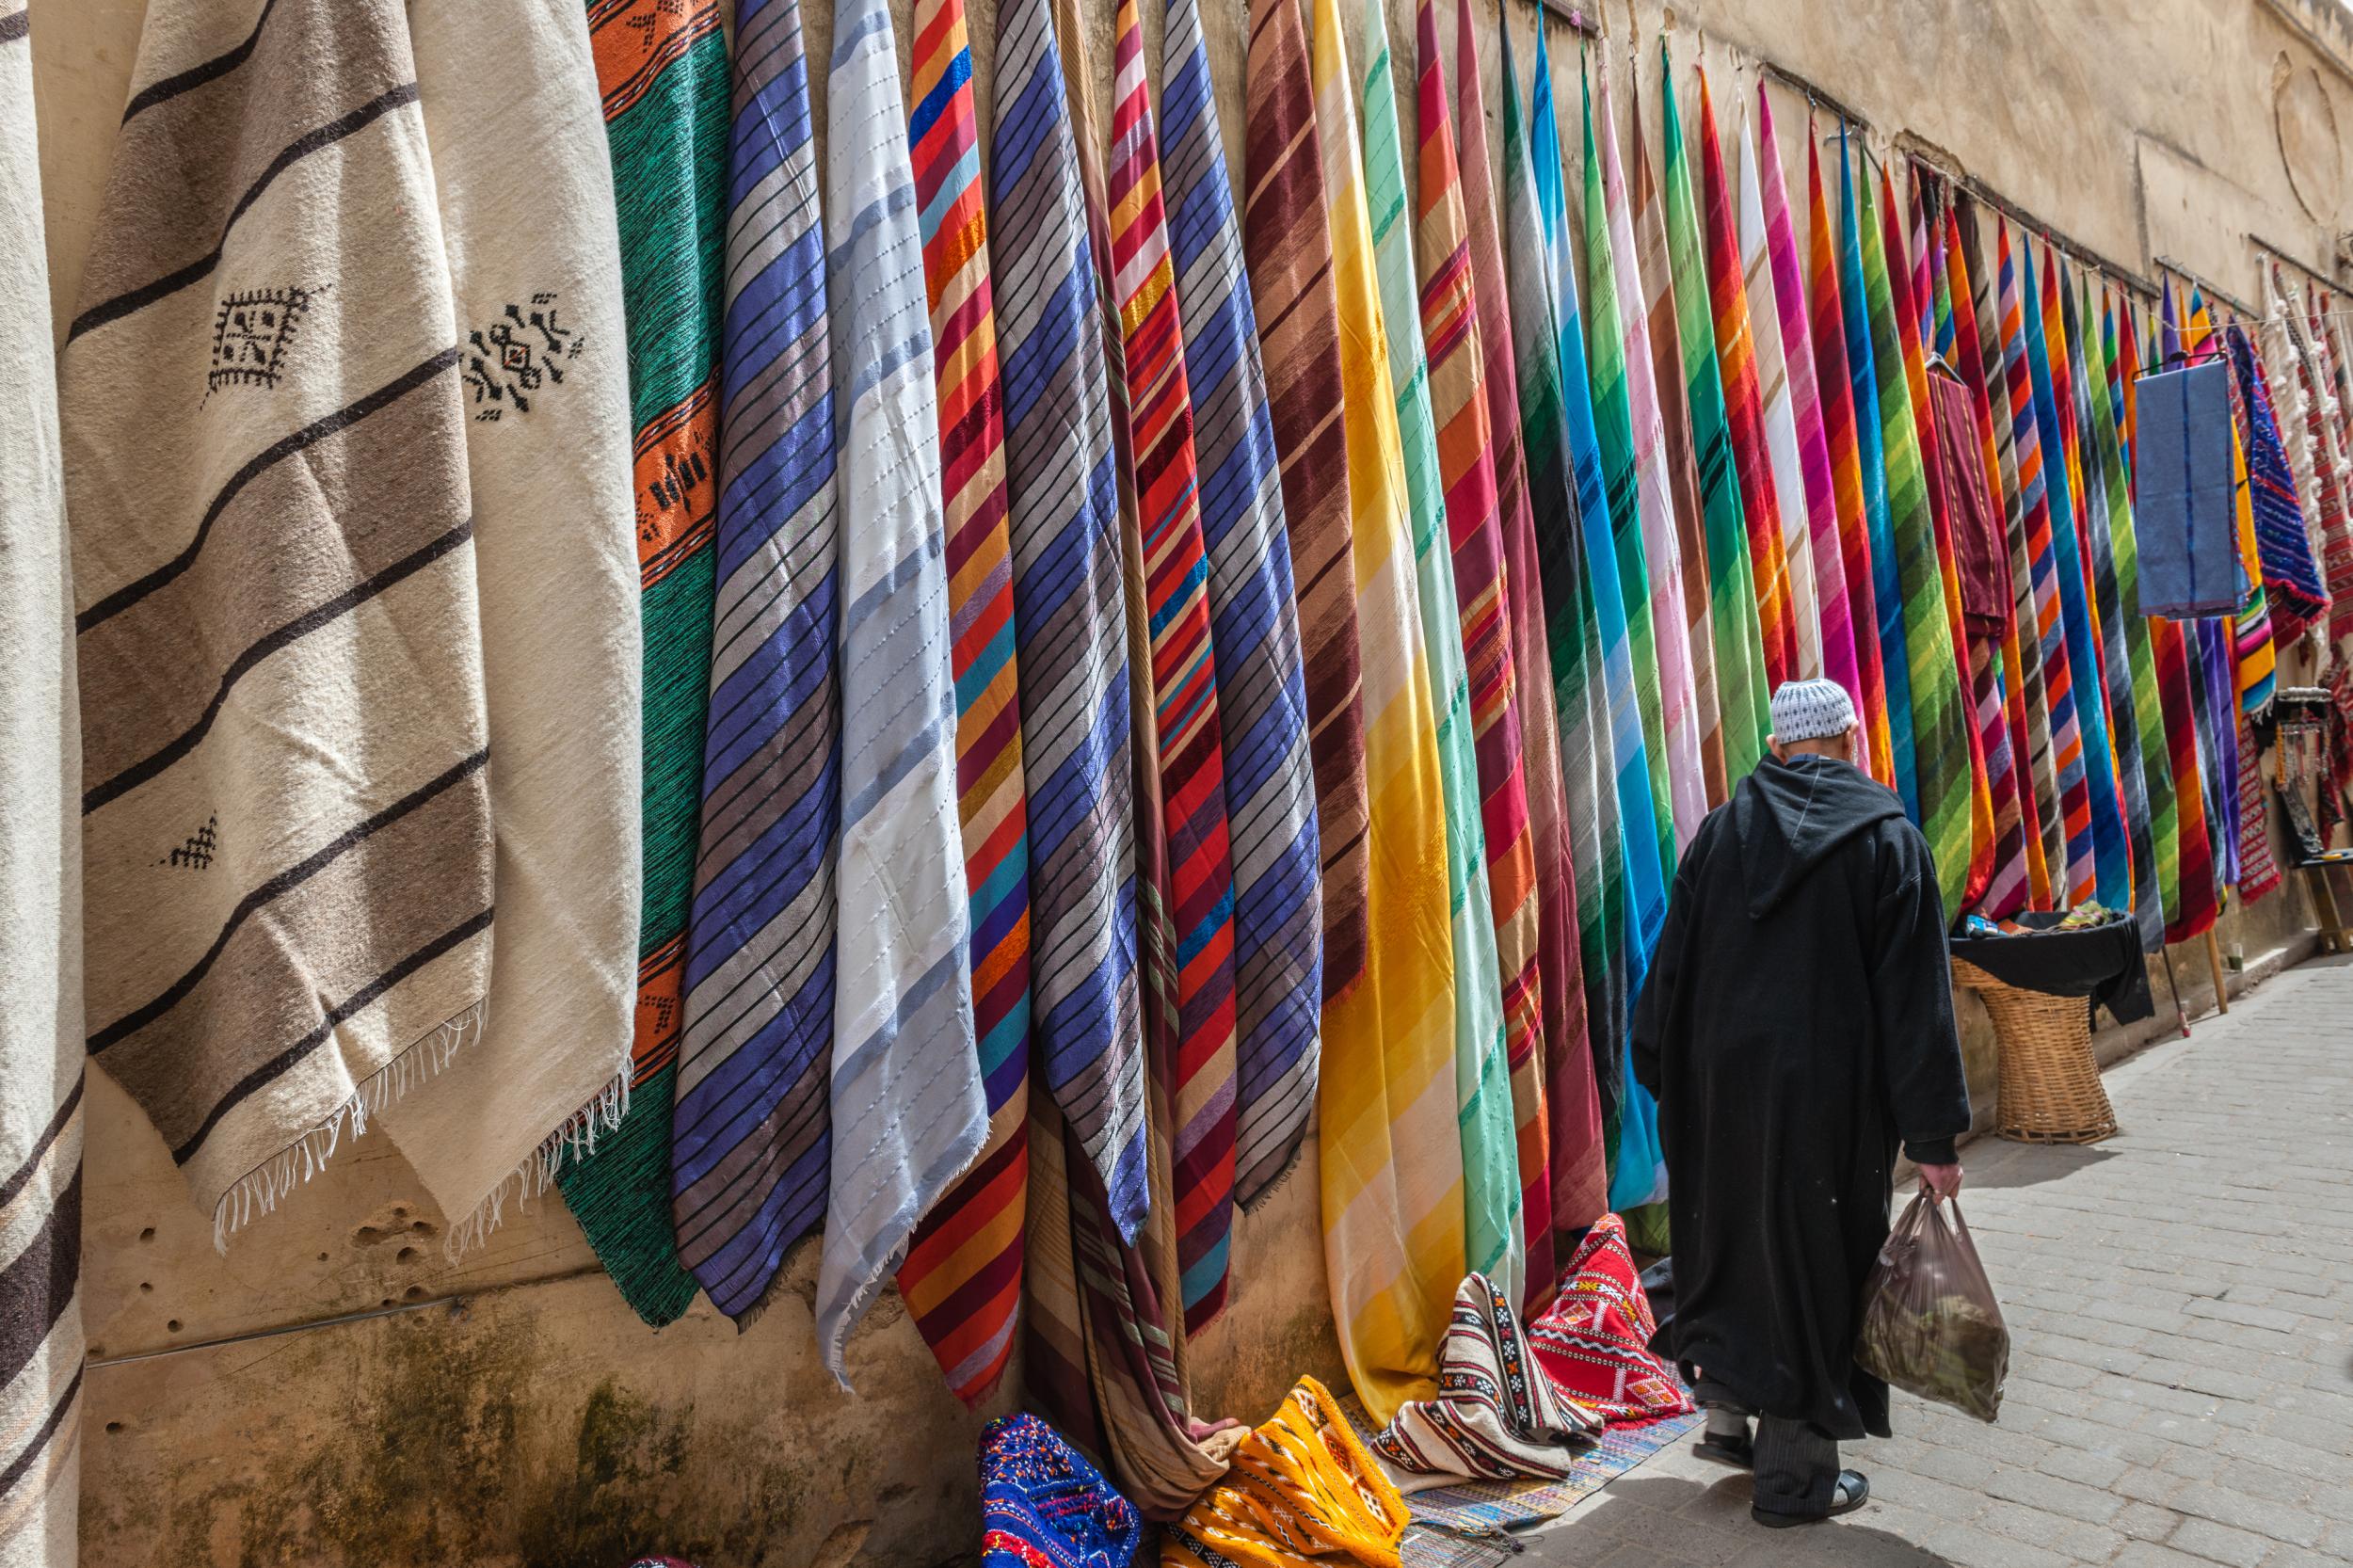 Marvel at the selection of colours and fabrics available in the medina